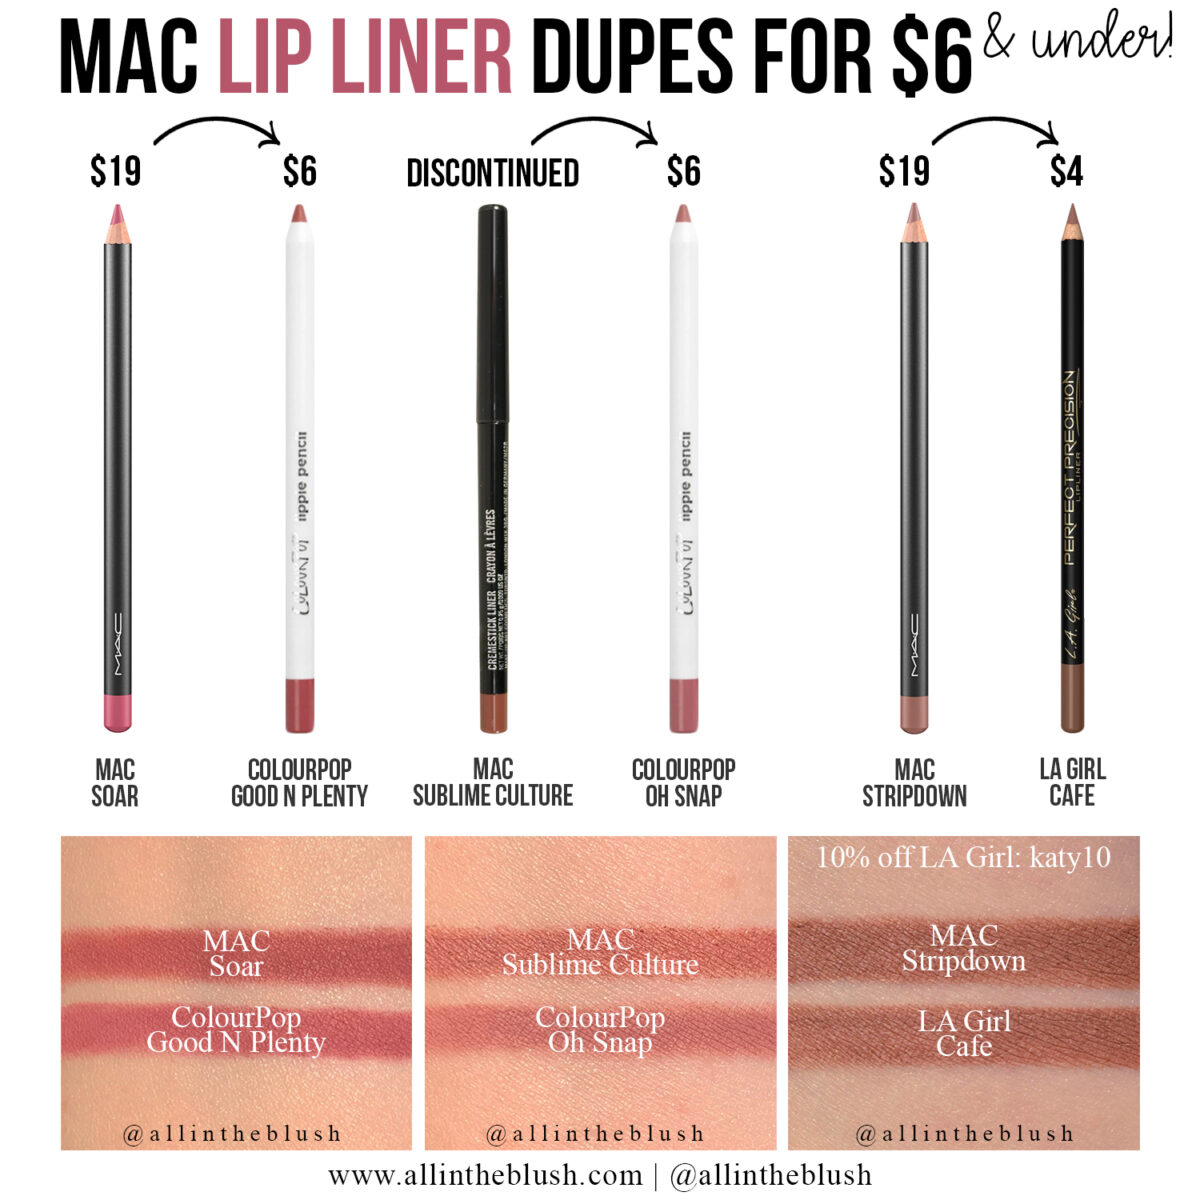 Drugstore Dupe For Chanel Lip Gloss - Cremes Come True